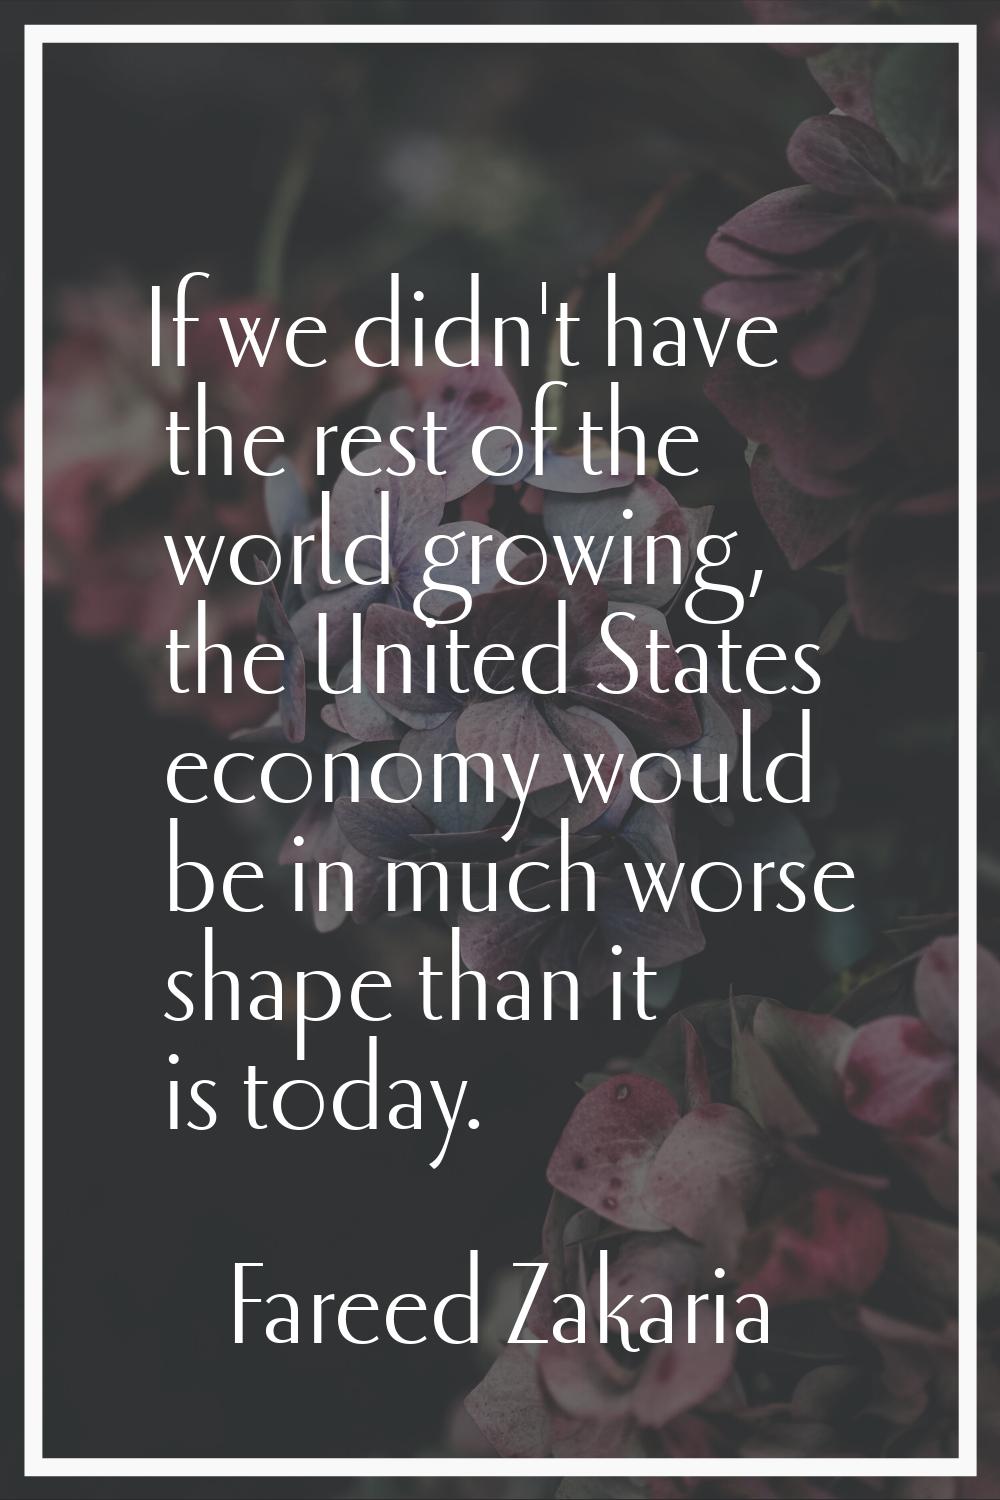 If we didn't have the rest of the world growing, the United States economy would be in much worse s